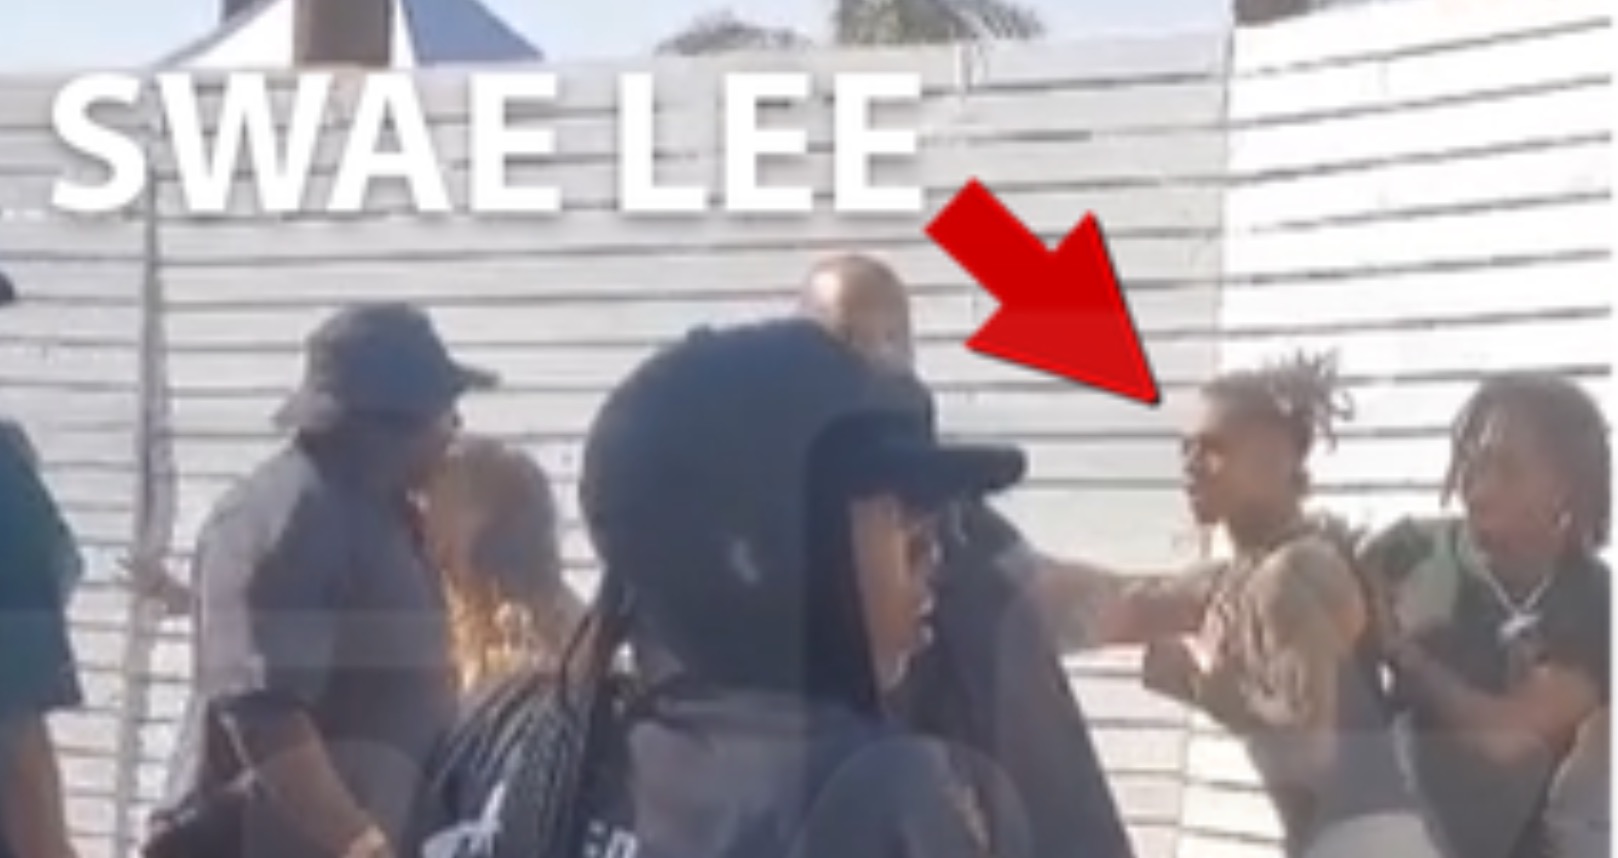 Swae Lee Gets in Backstage Fight with Security at Coachella - Watch Video